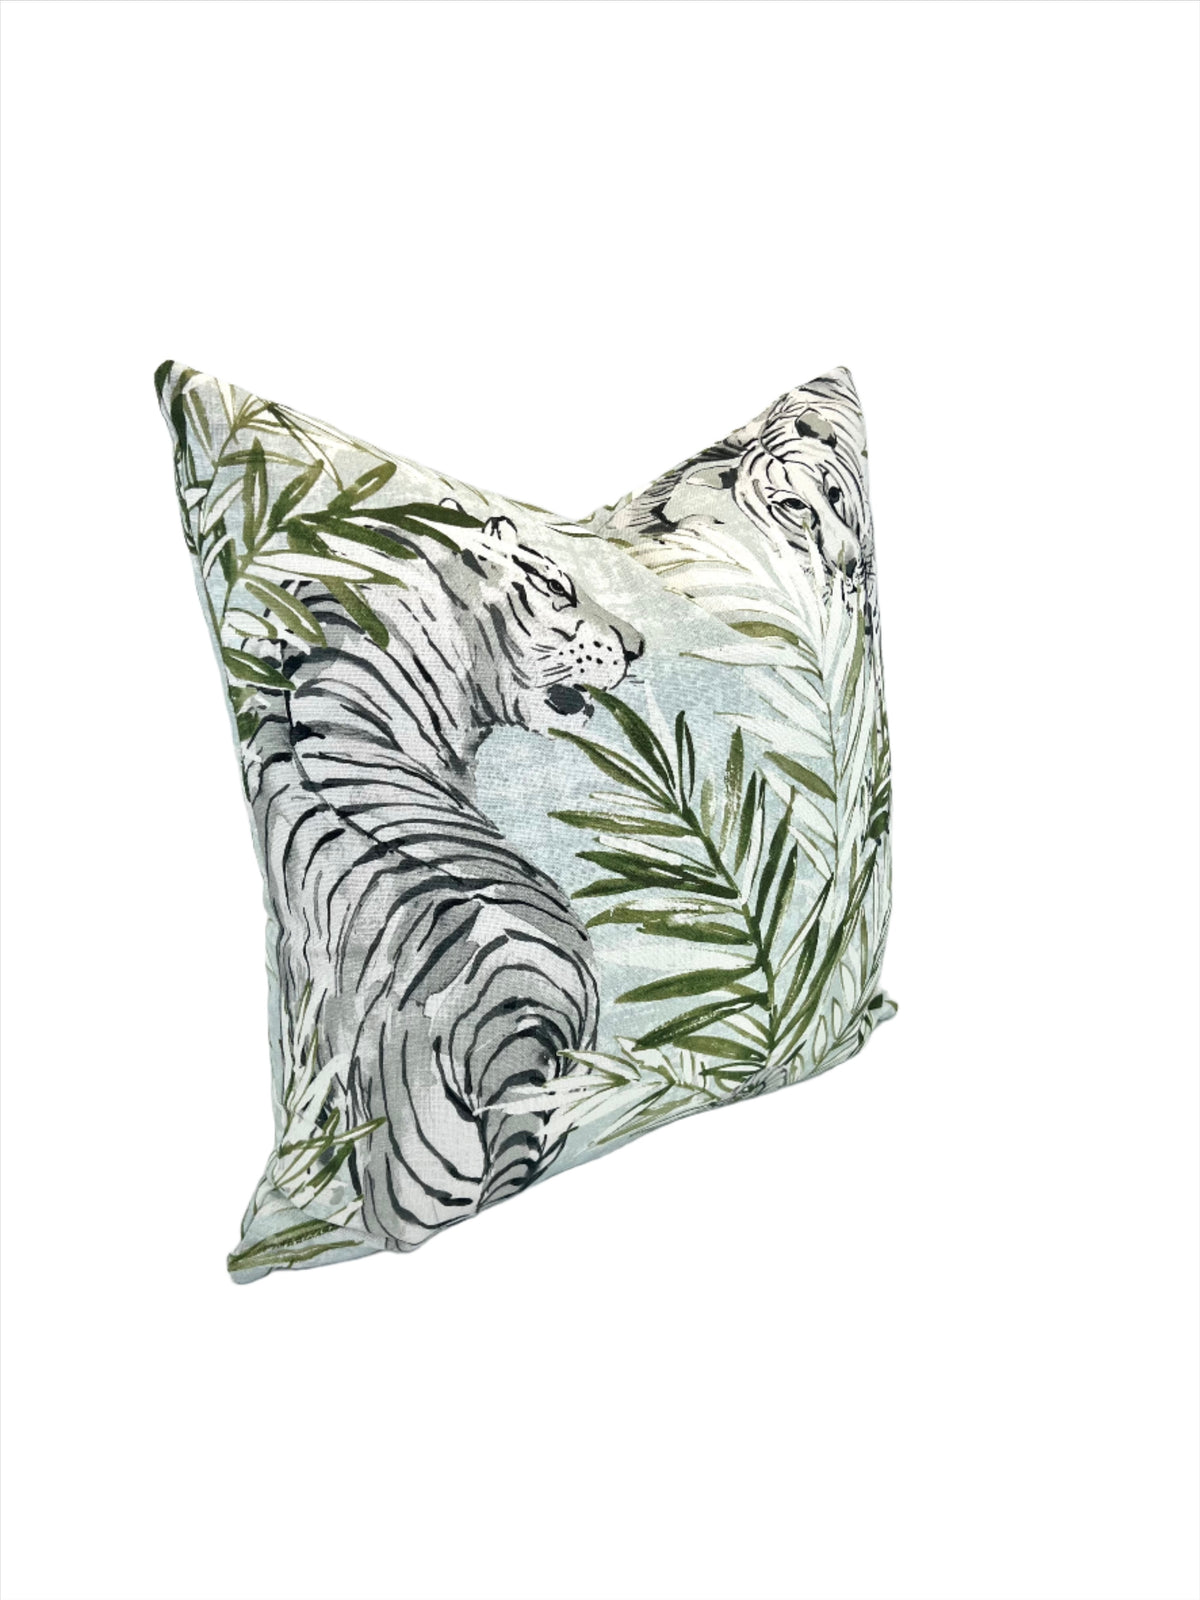 Tropical Tiger In Spa Decorative Pillow Cover